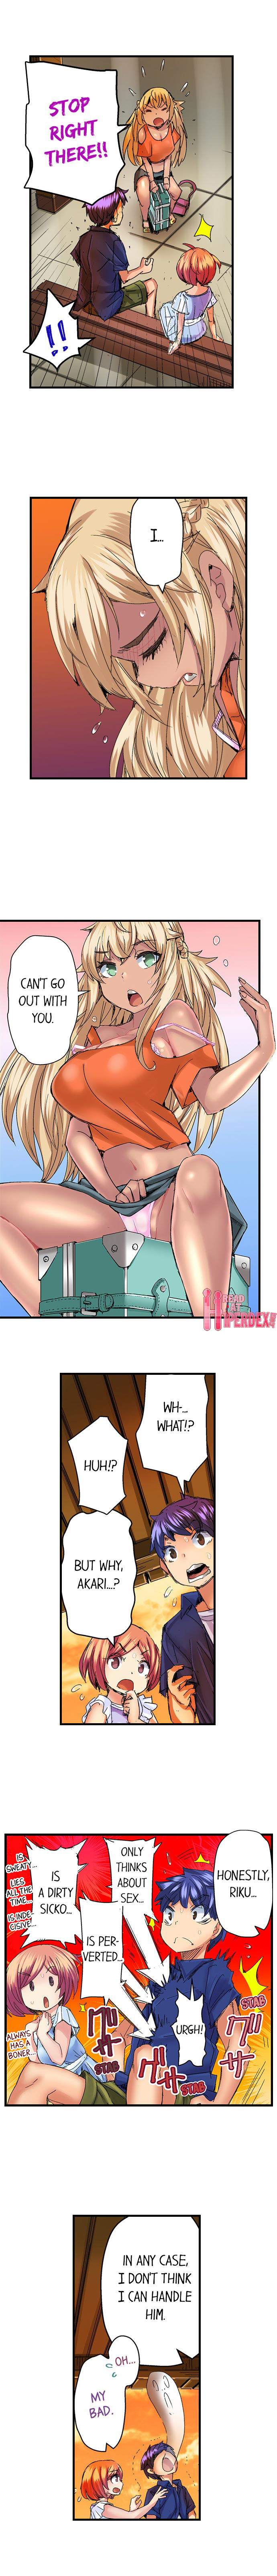 Taking a Hot Tanned Chick’s Virginity - Chapter 39 Page 5